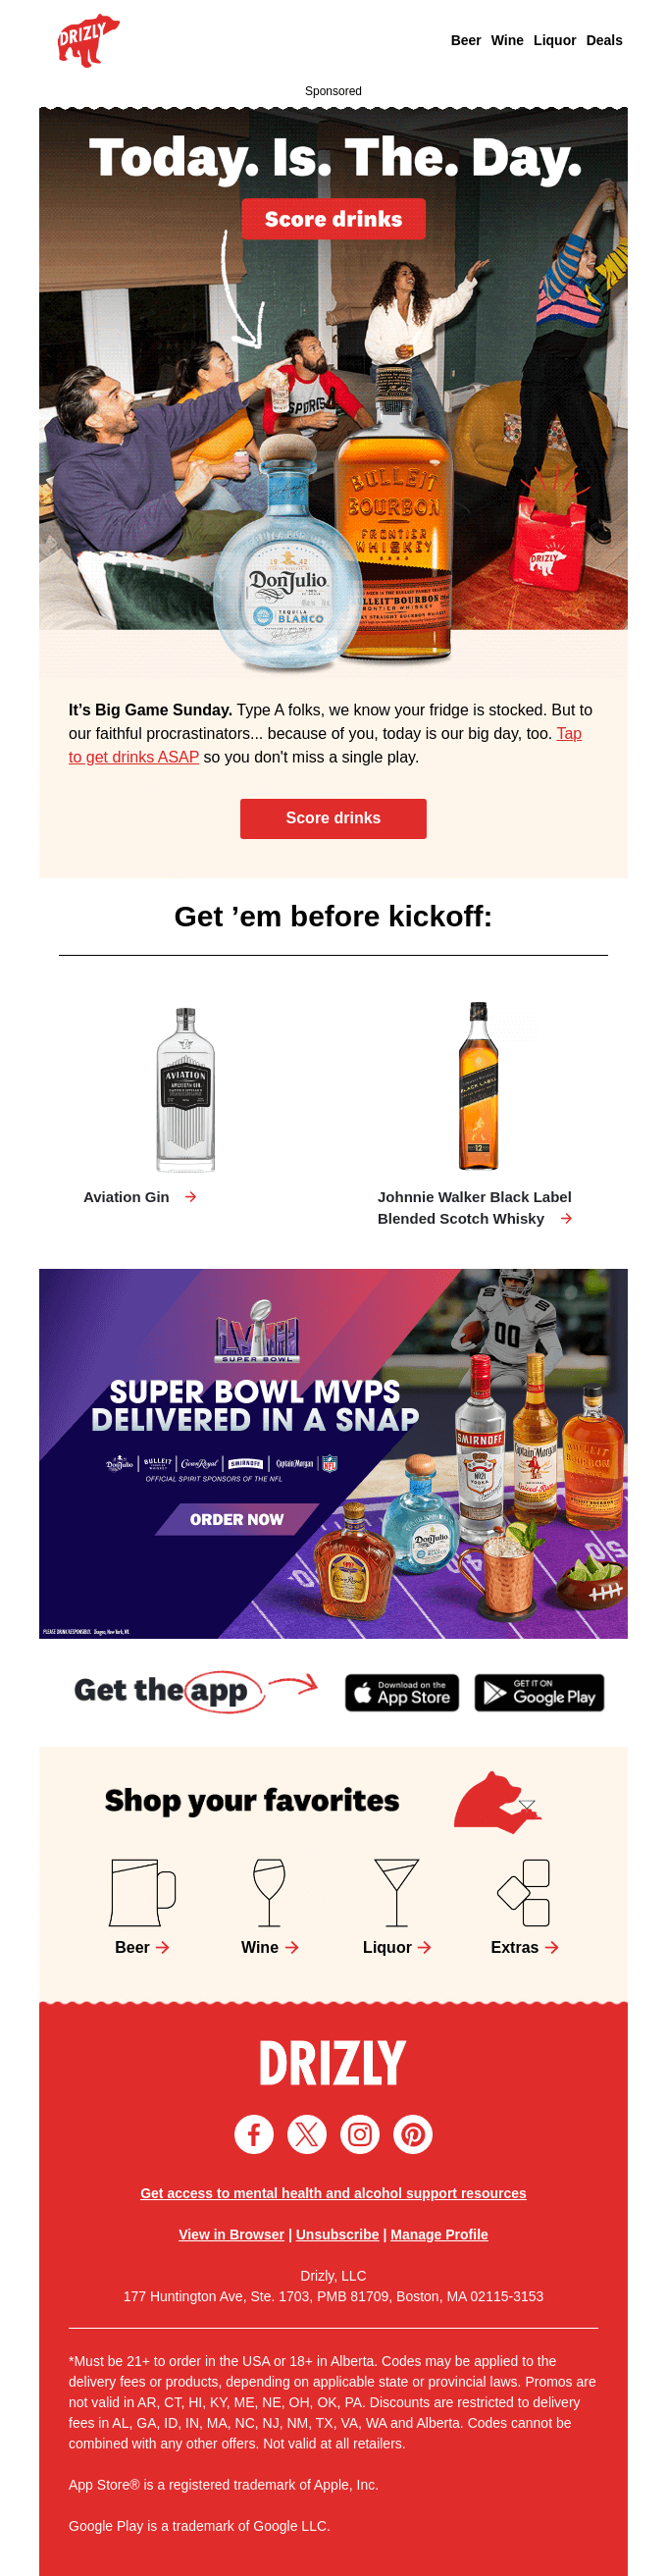 Get game-day bevs ASAP.